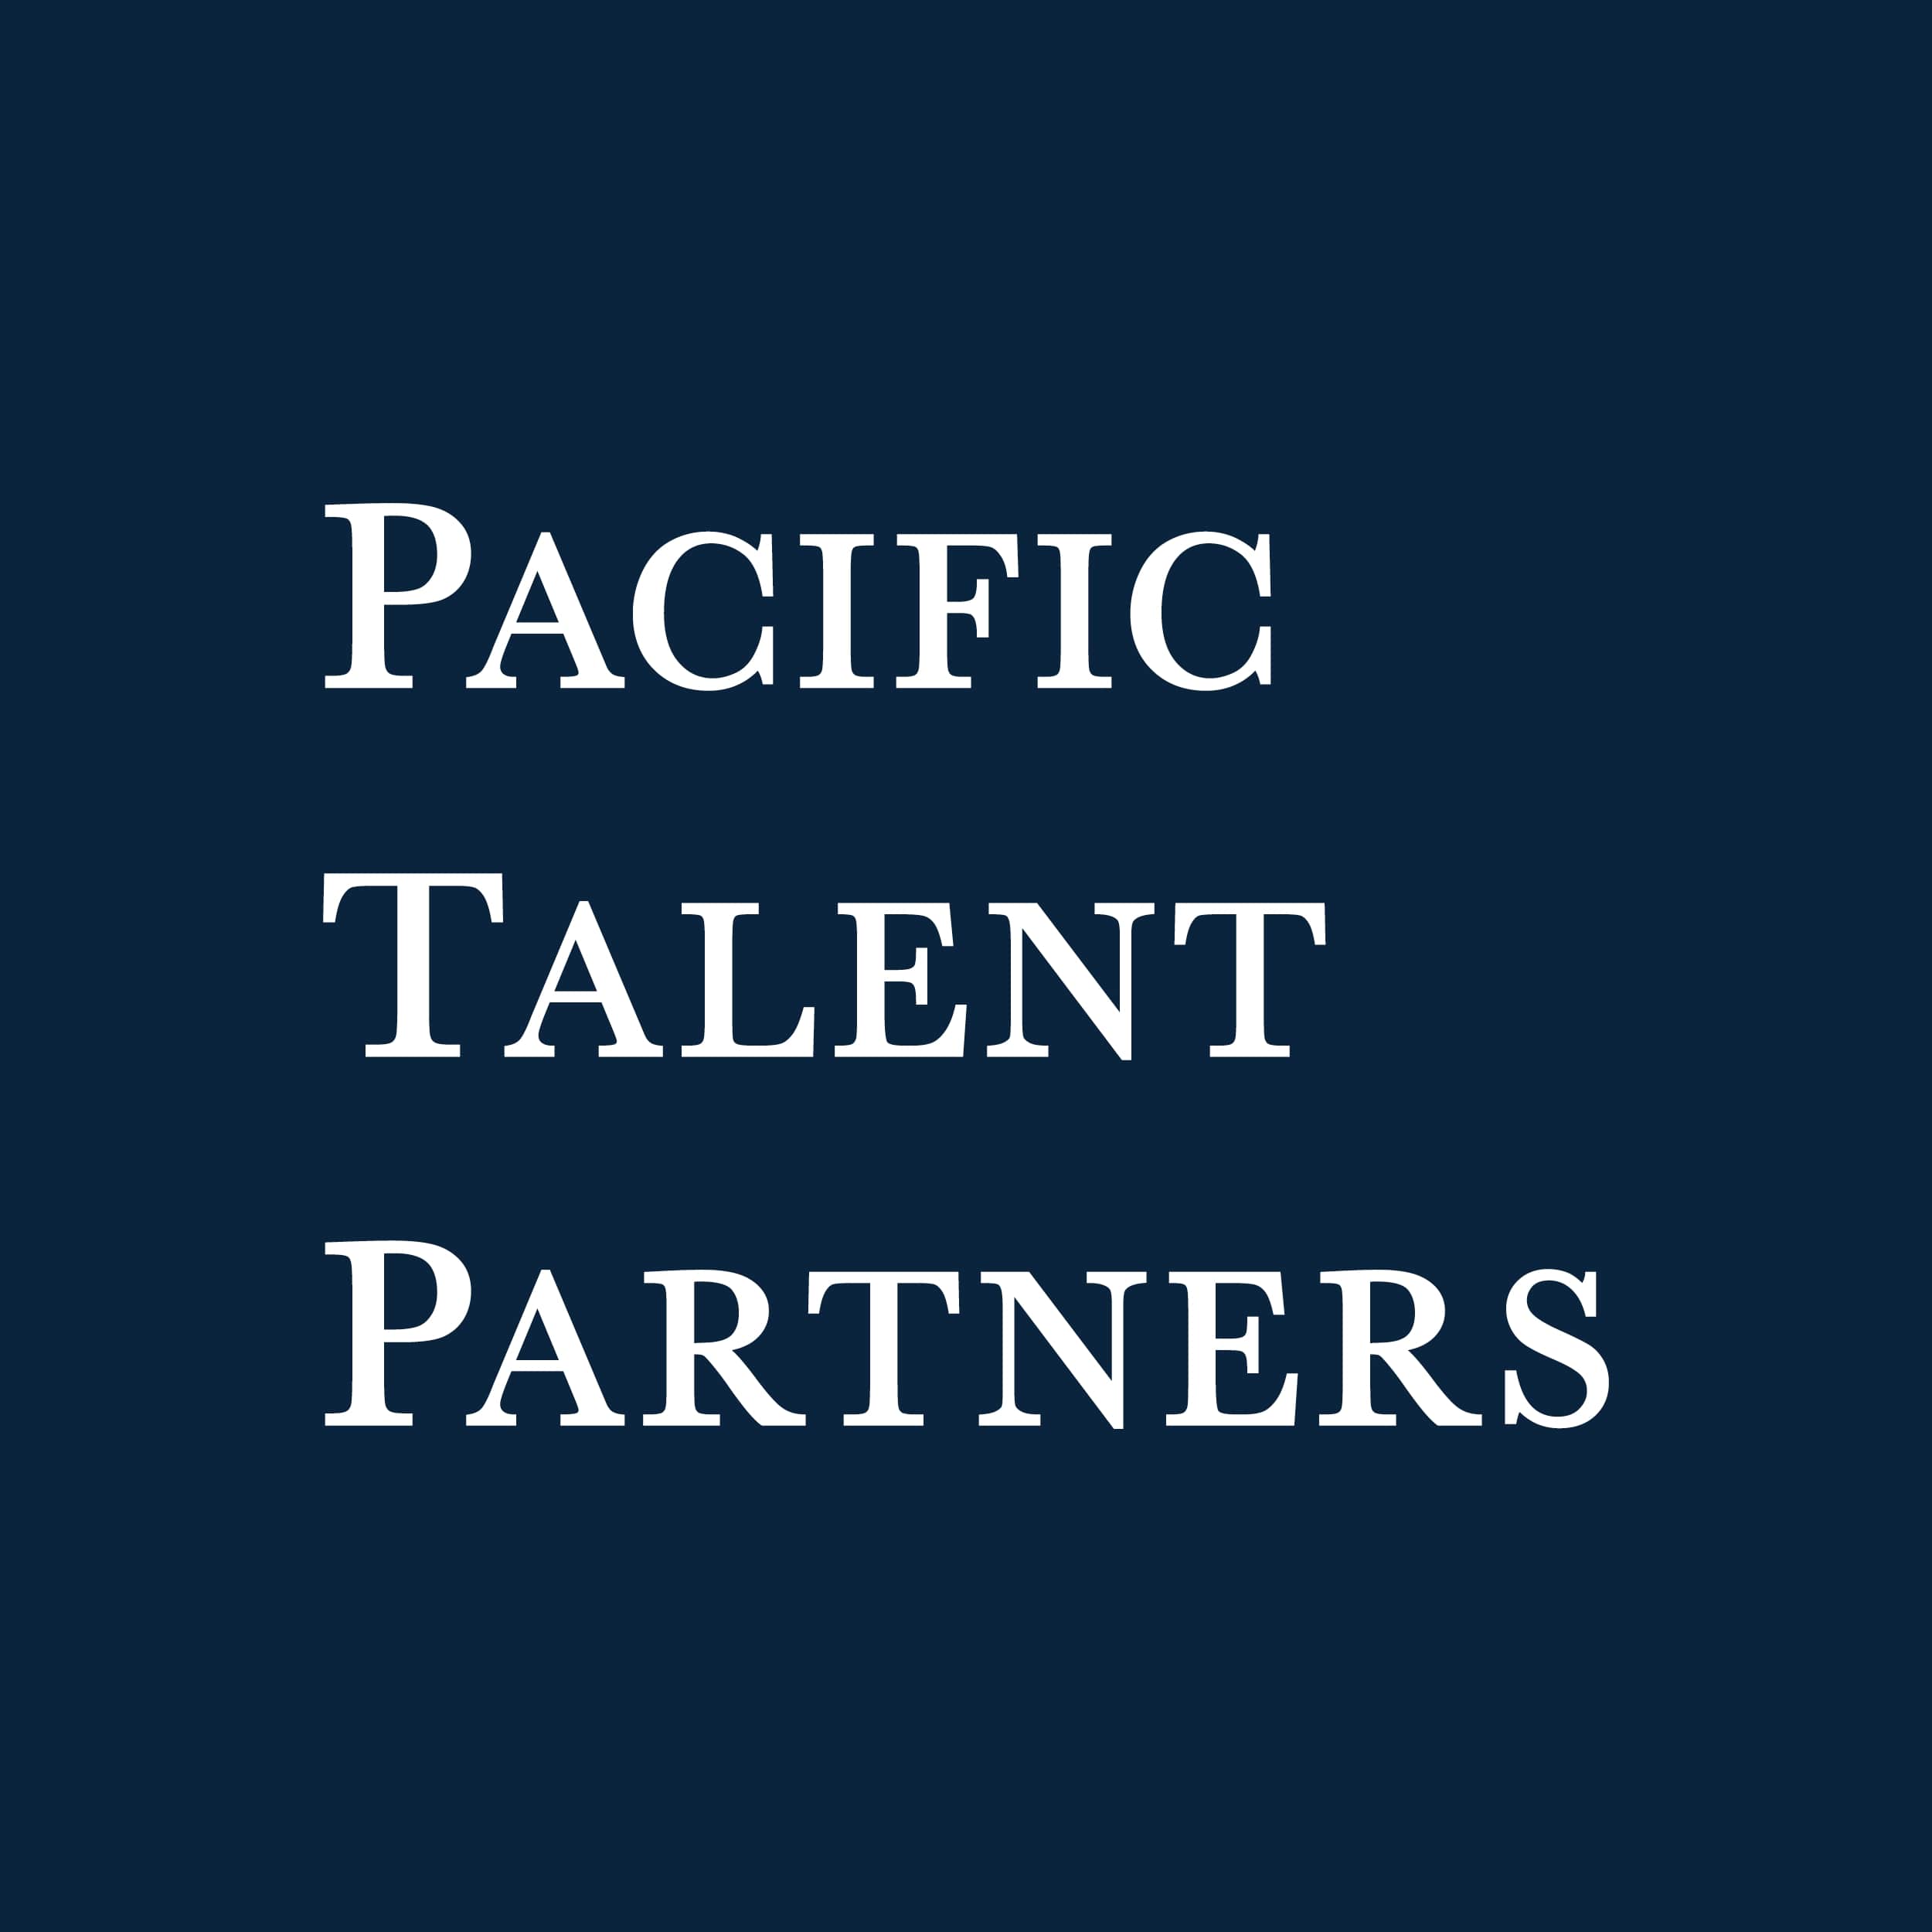 Pacific Talent Partners